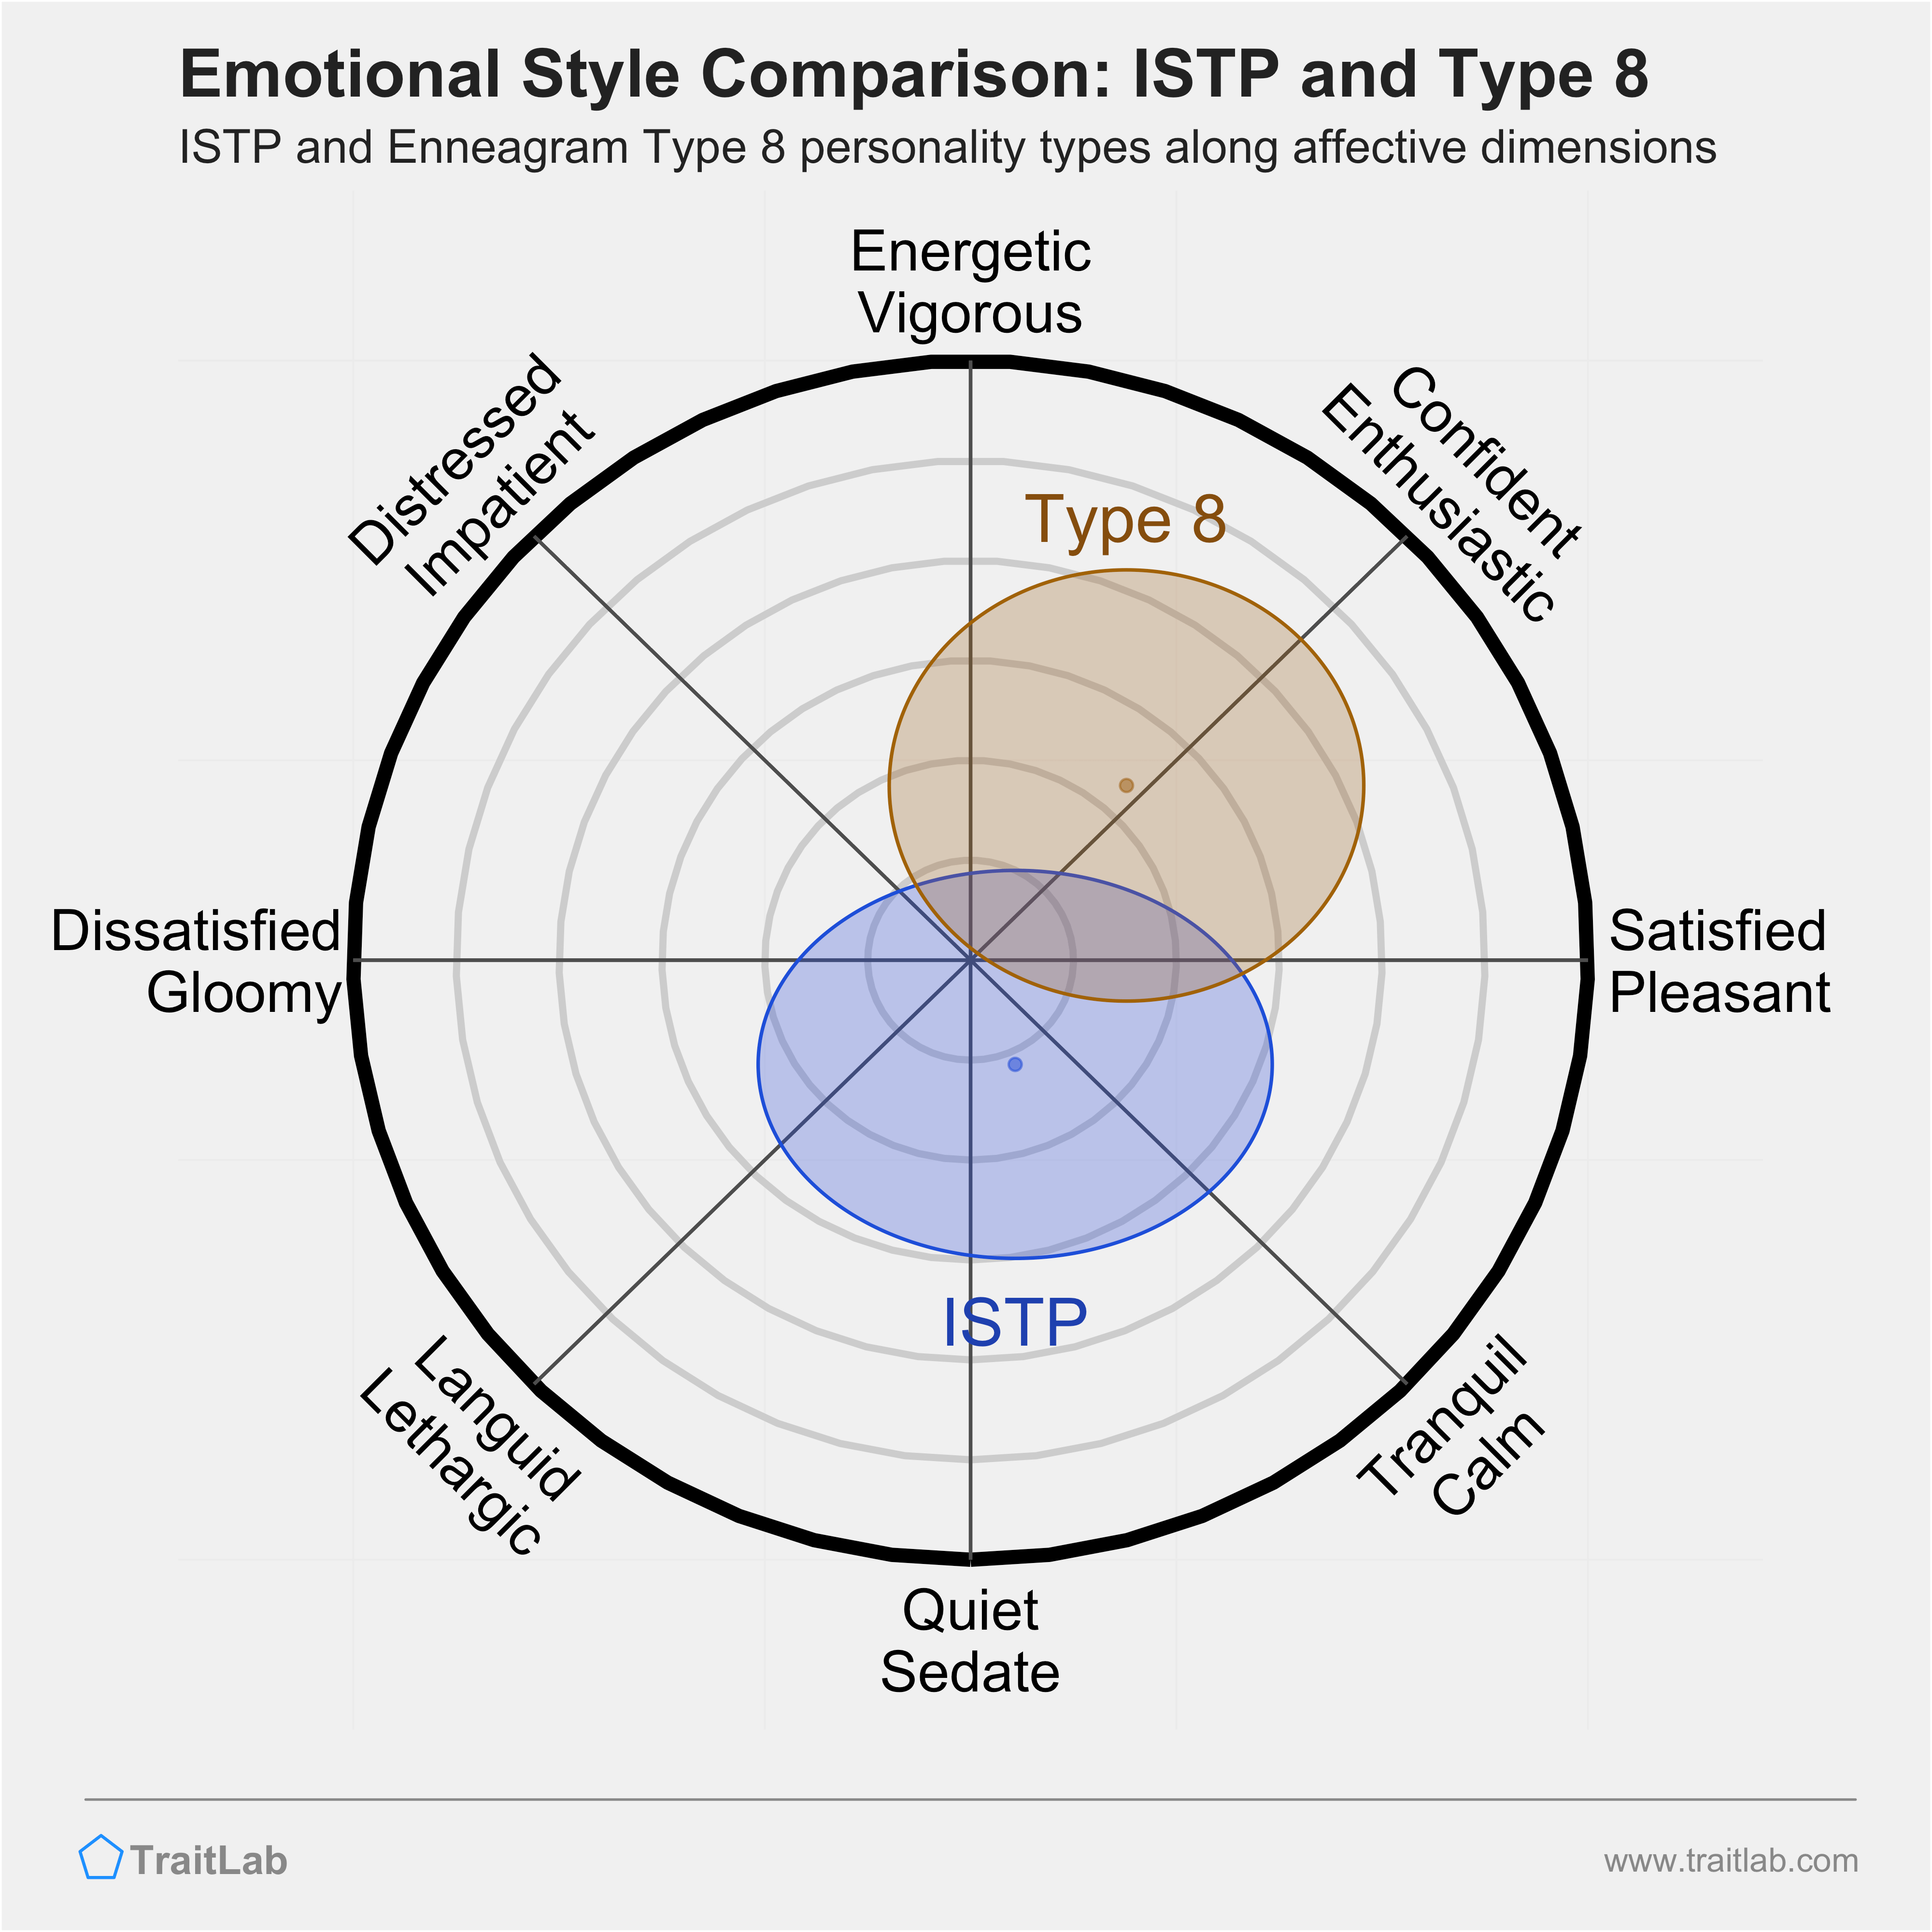 ISTP and Type 8 comparison across emotional (affective) dimensions